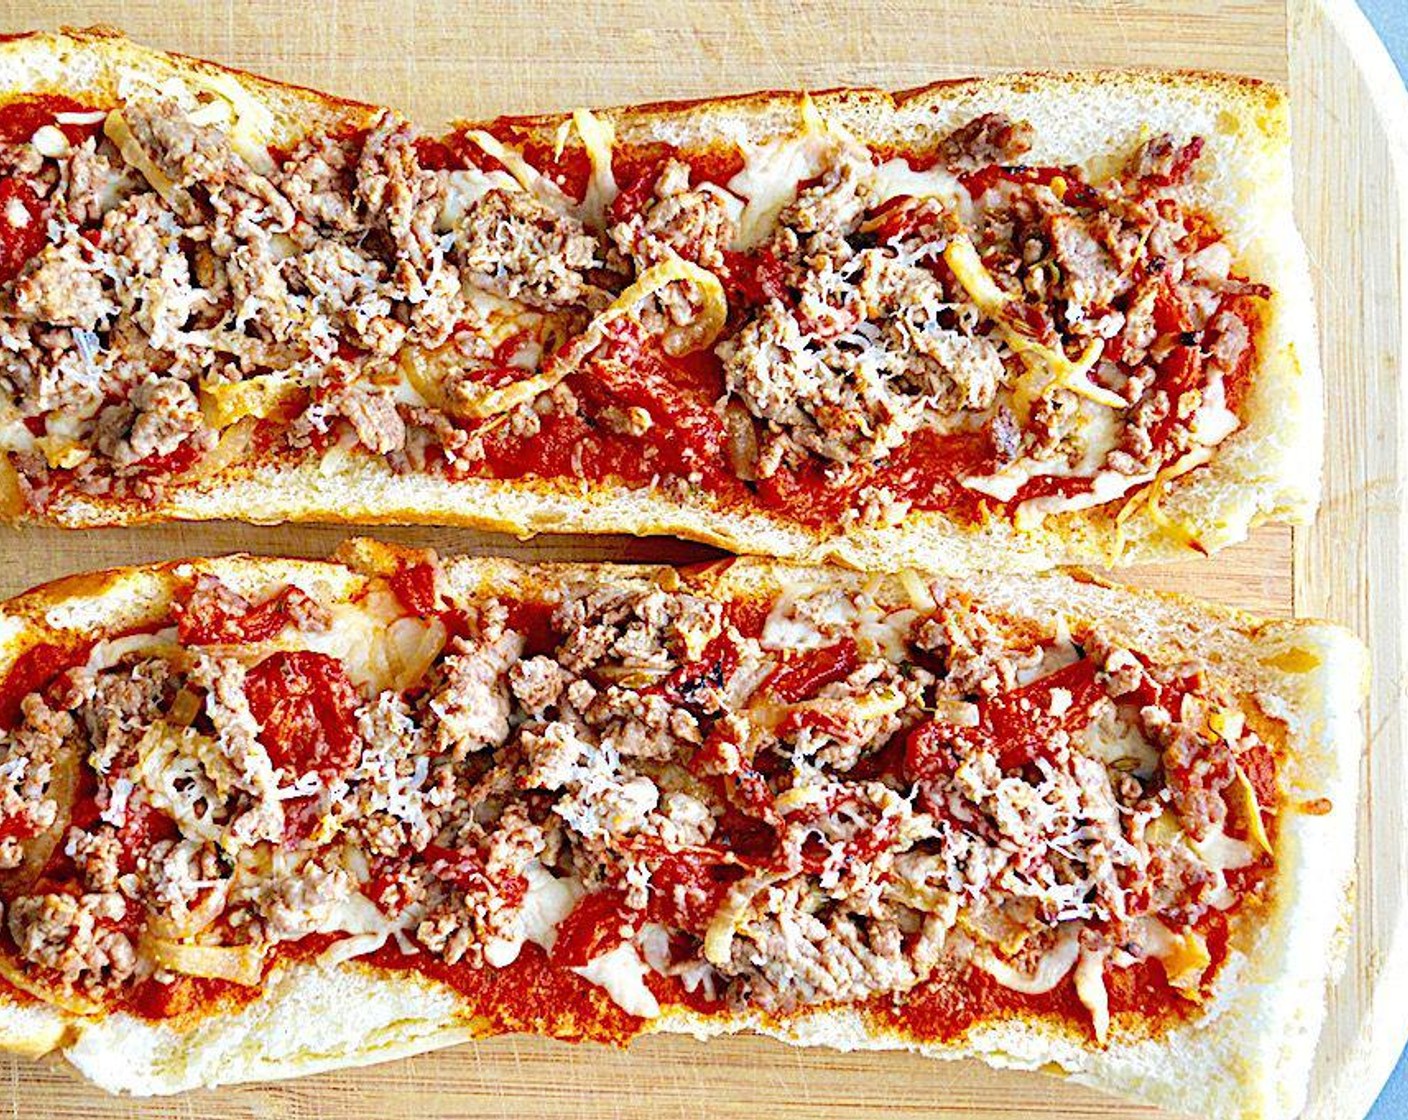 Loaded French Bread Pizzas